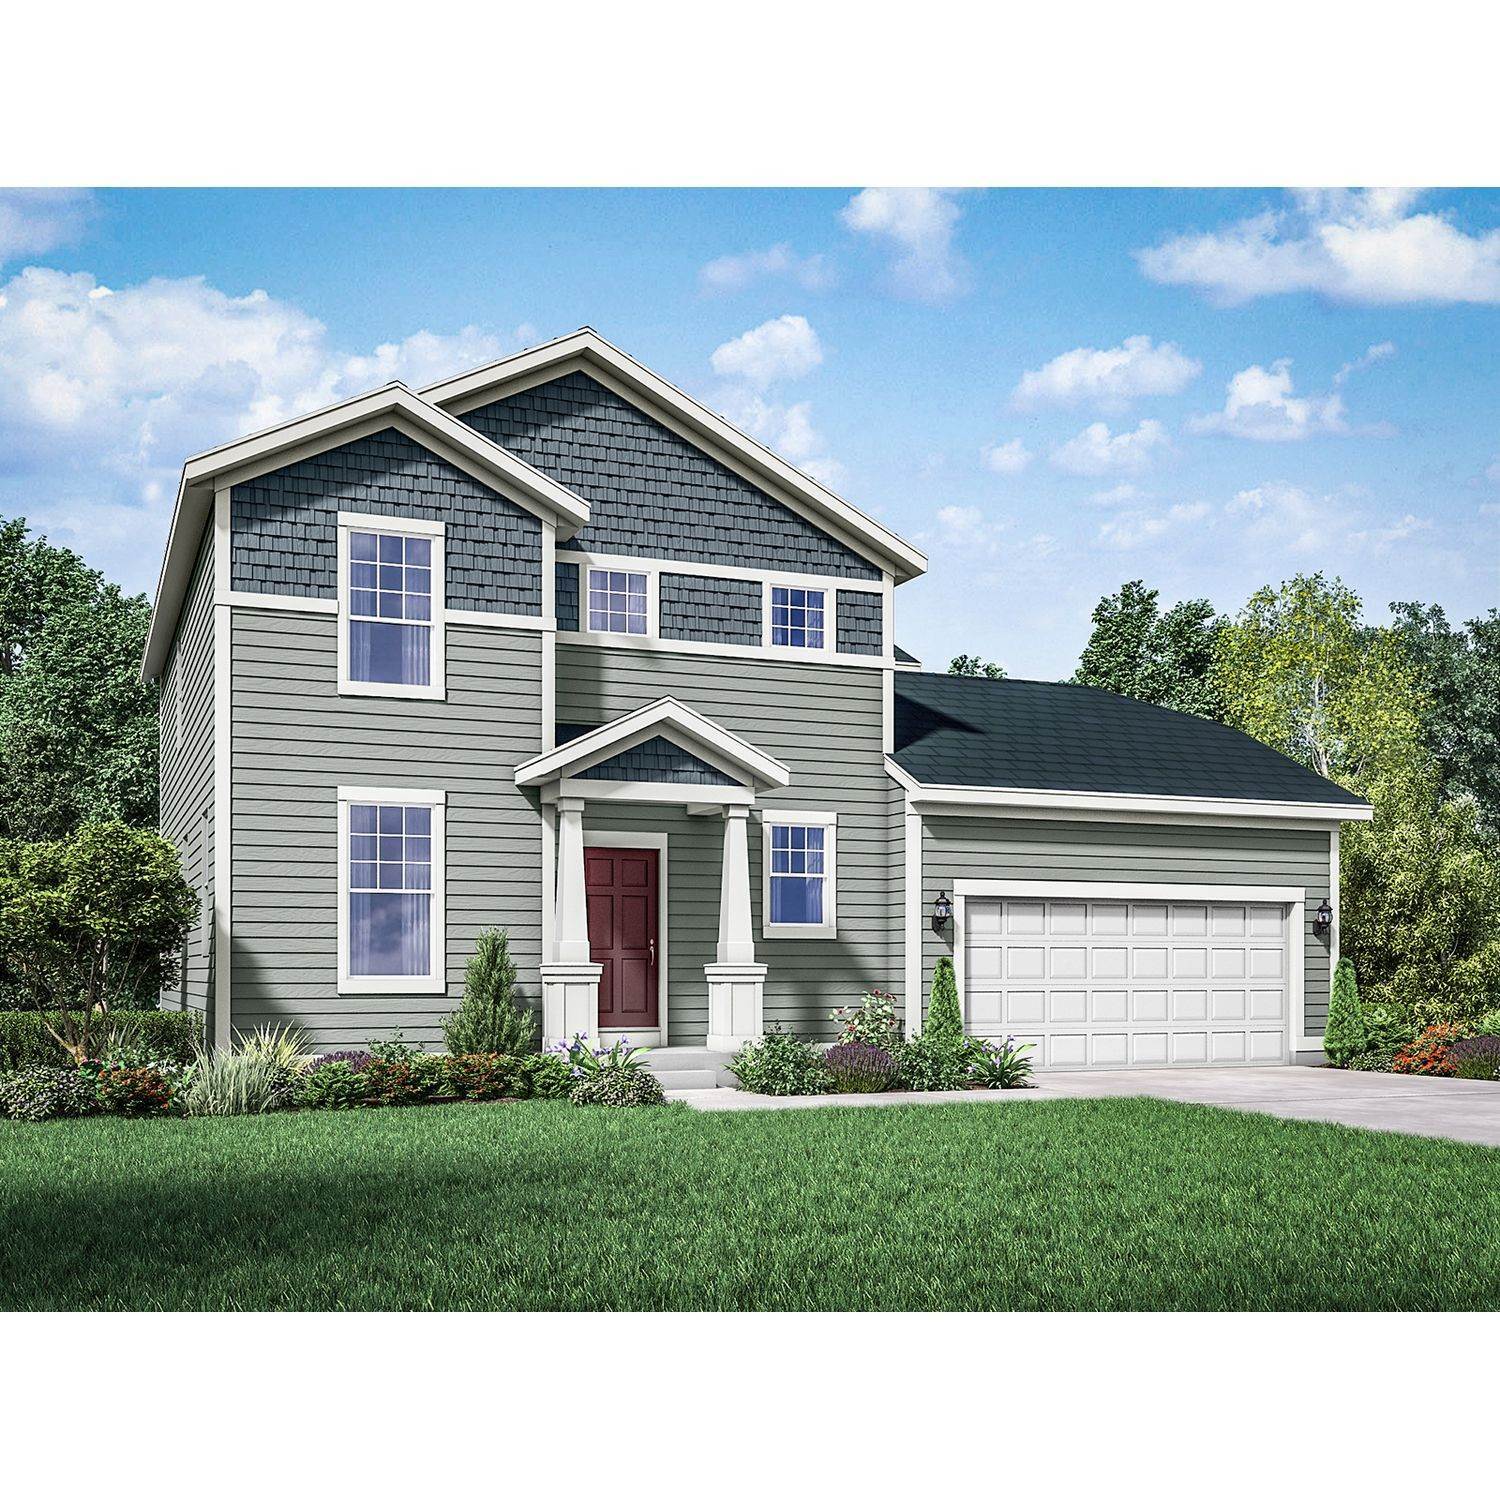 5. Single Family for Sale at Sun Prairie, WI 53590